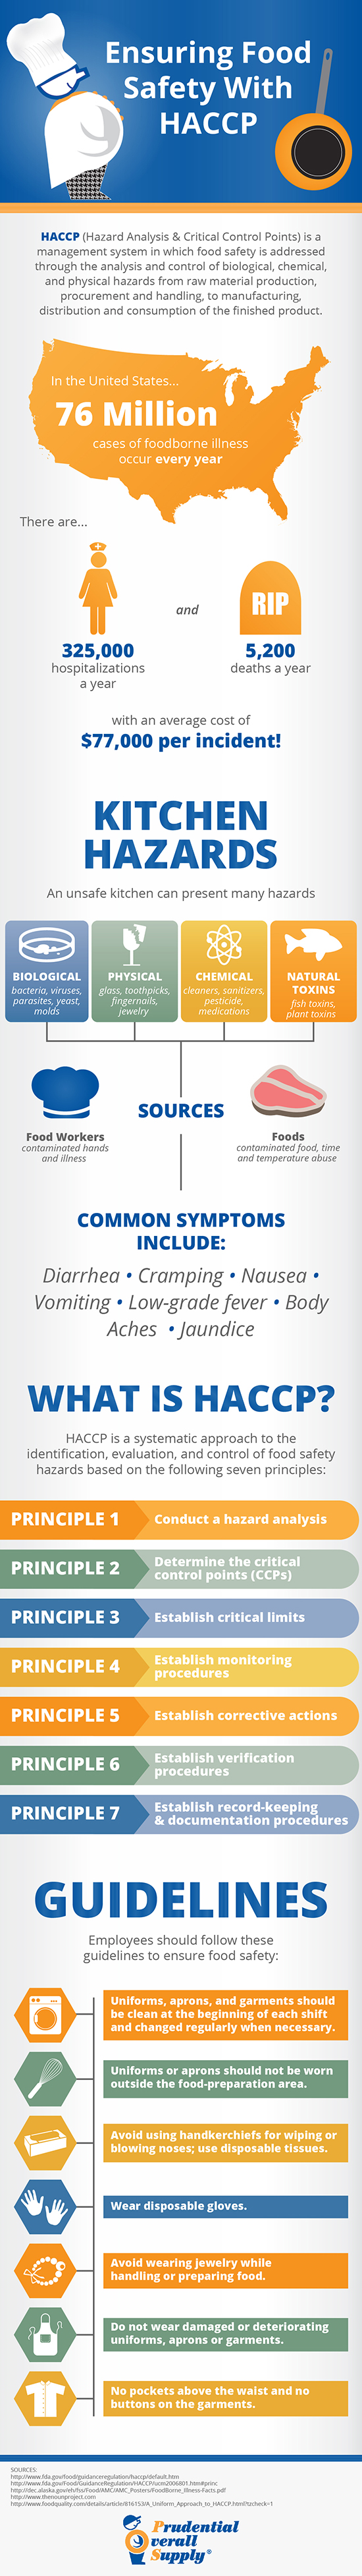 Ensuring Food Safety With HACCP